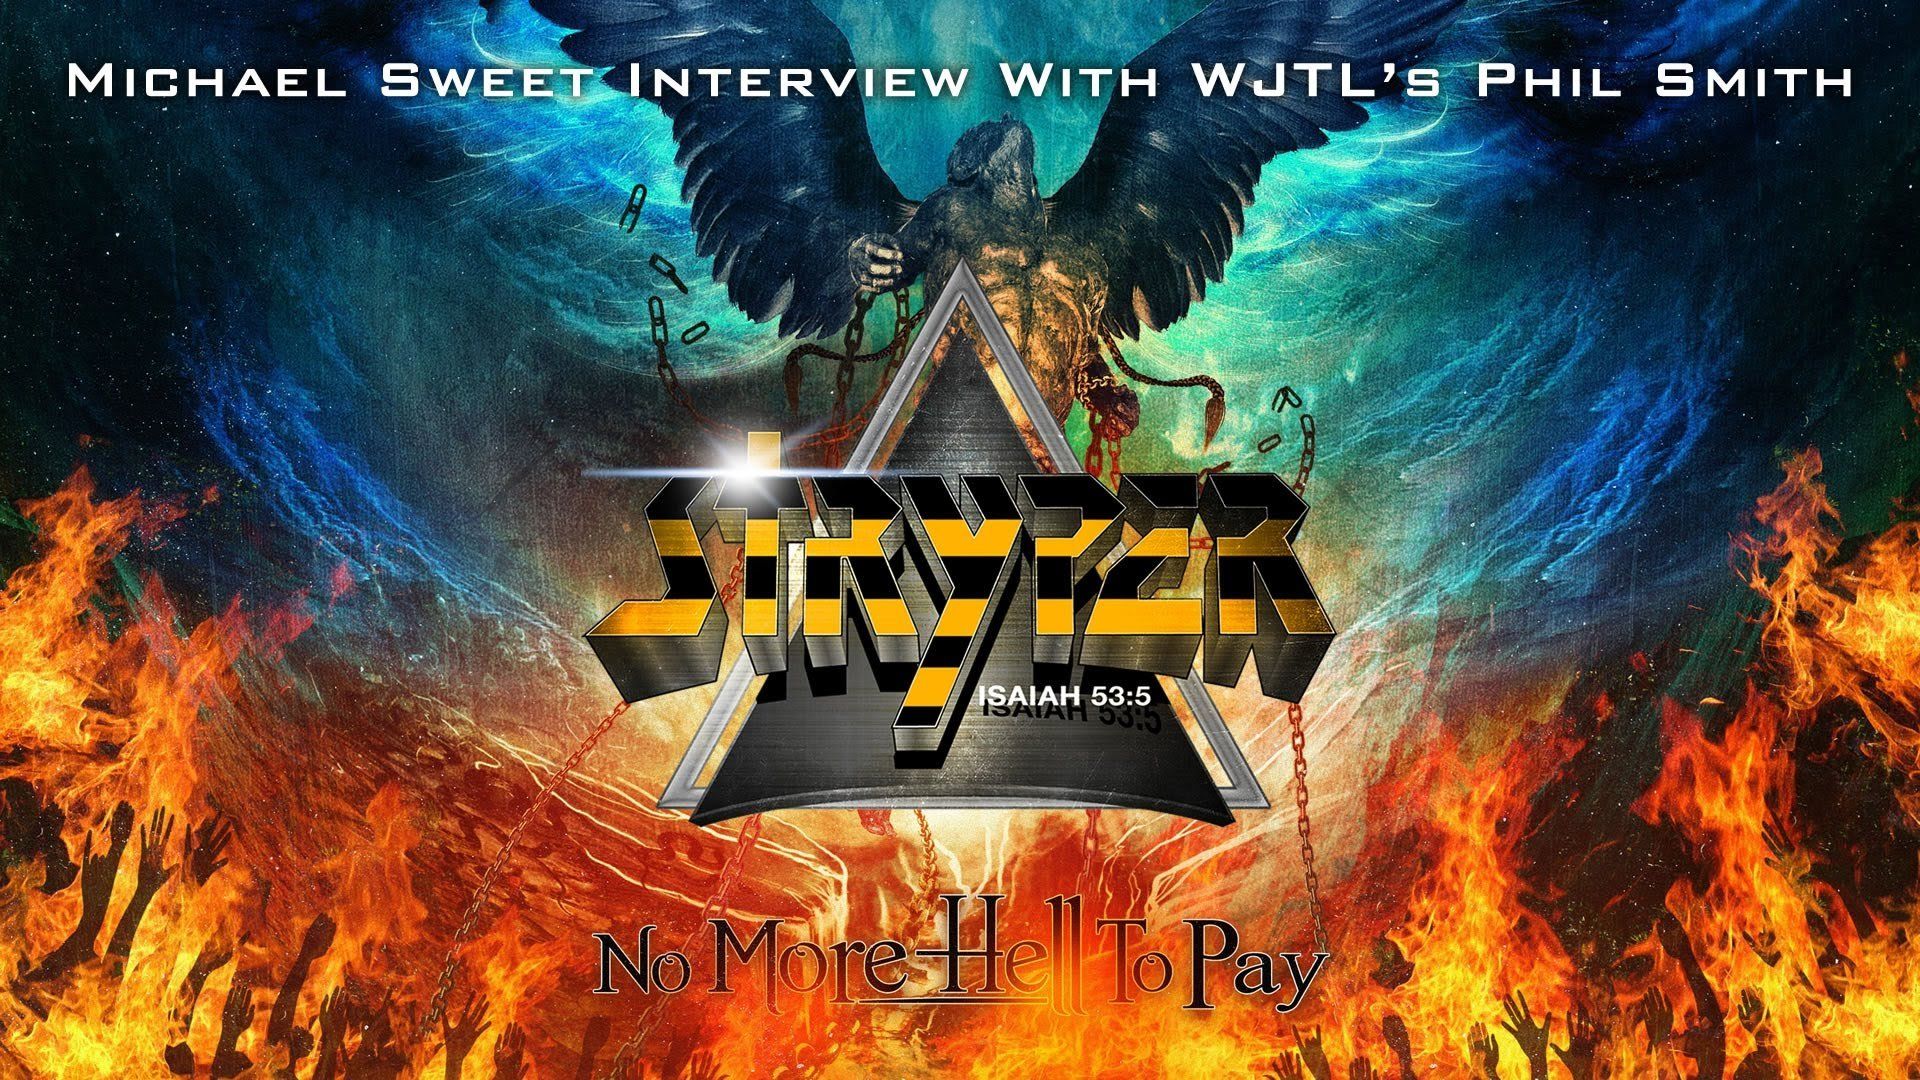 STRYPER is the first Christian Heavy Metal band in History